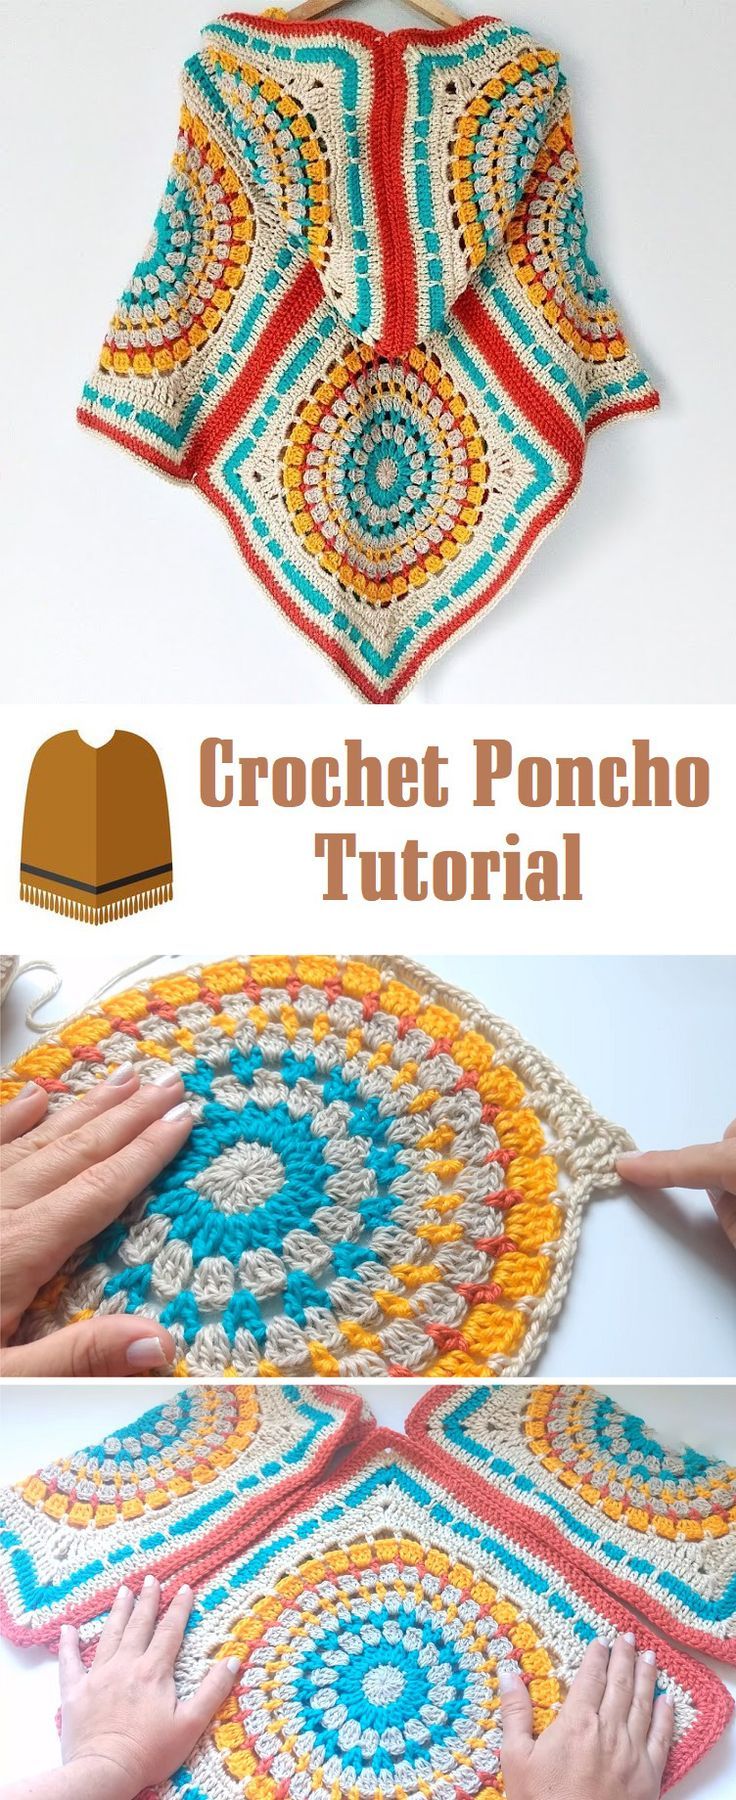 How-to-Crochet-a-Poncho-Crochet-and-Knitting-Patterns.jpg